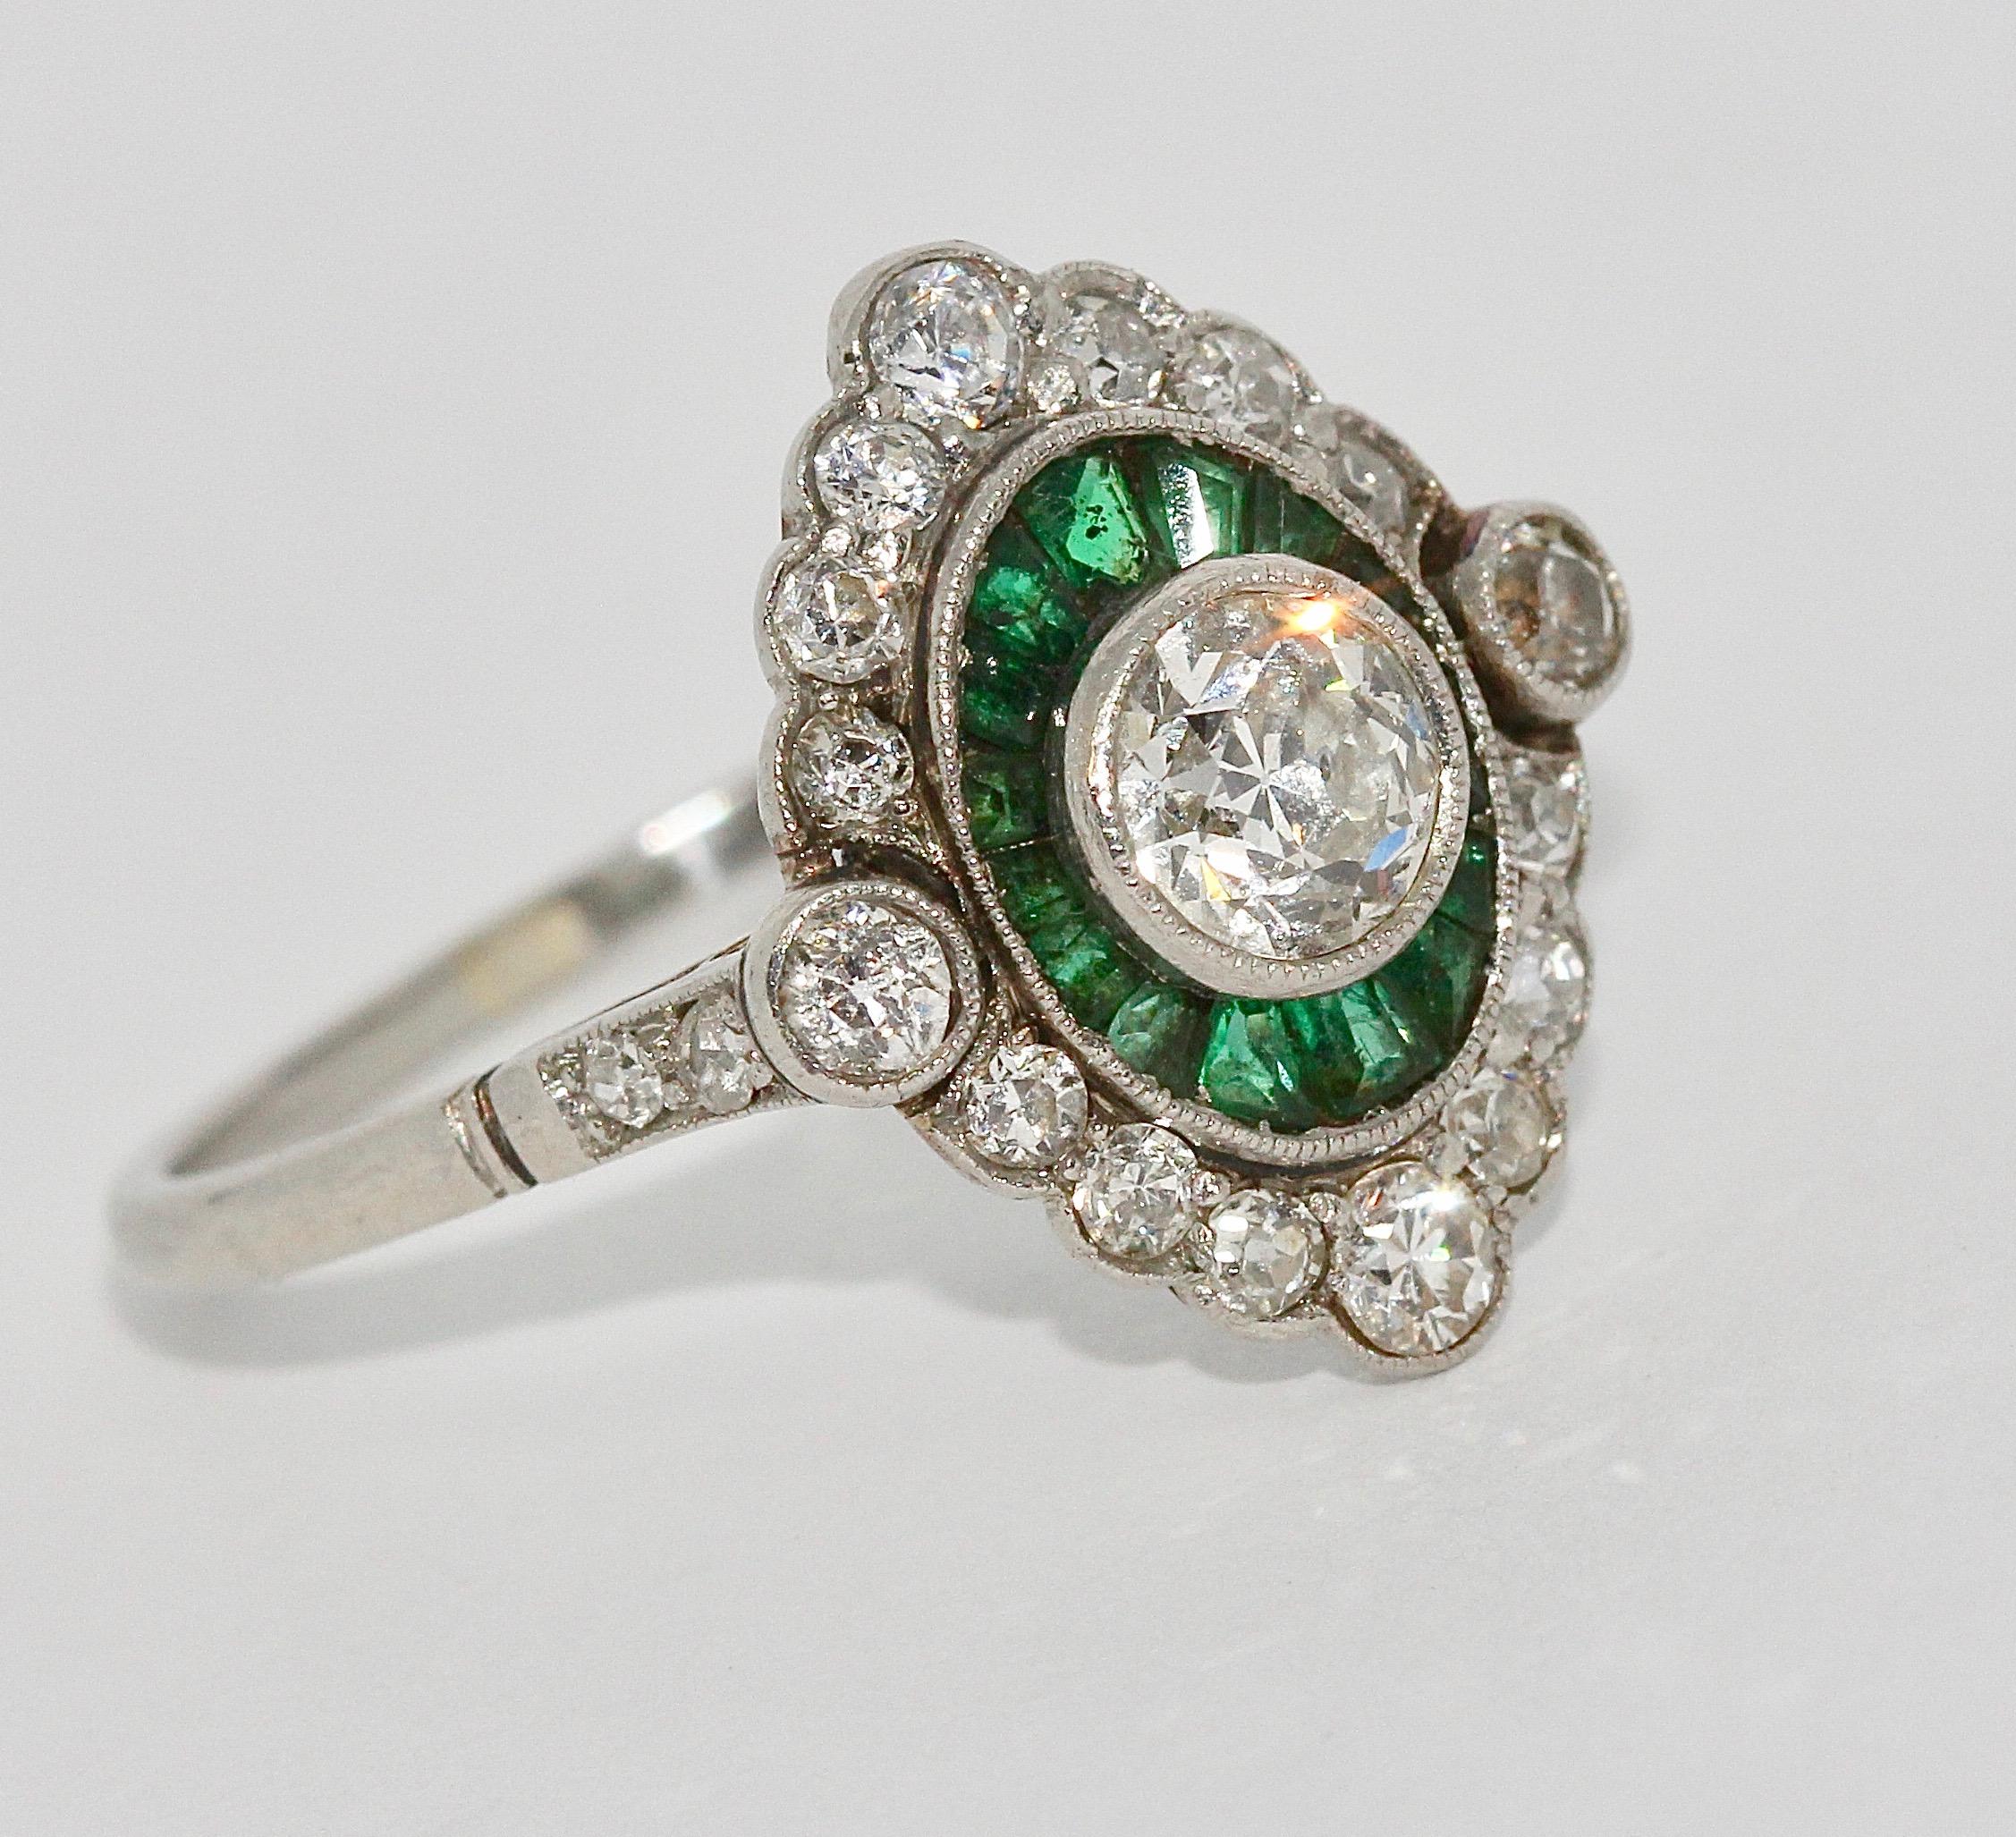 Antique Ladies Art Deco Style Gold Ring with Diamonds and Emeralds.


Platinum or white gold. Large solitaire has approx. 0.45 carat.

US ring size about 7 3/4.

Including certificate of authenticity.